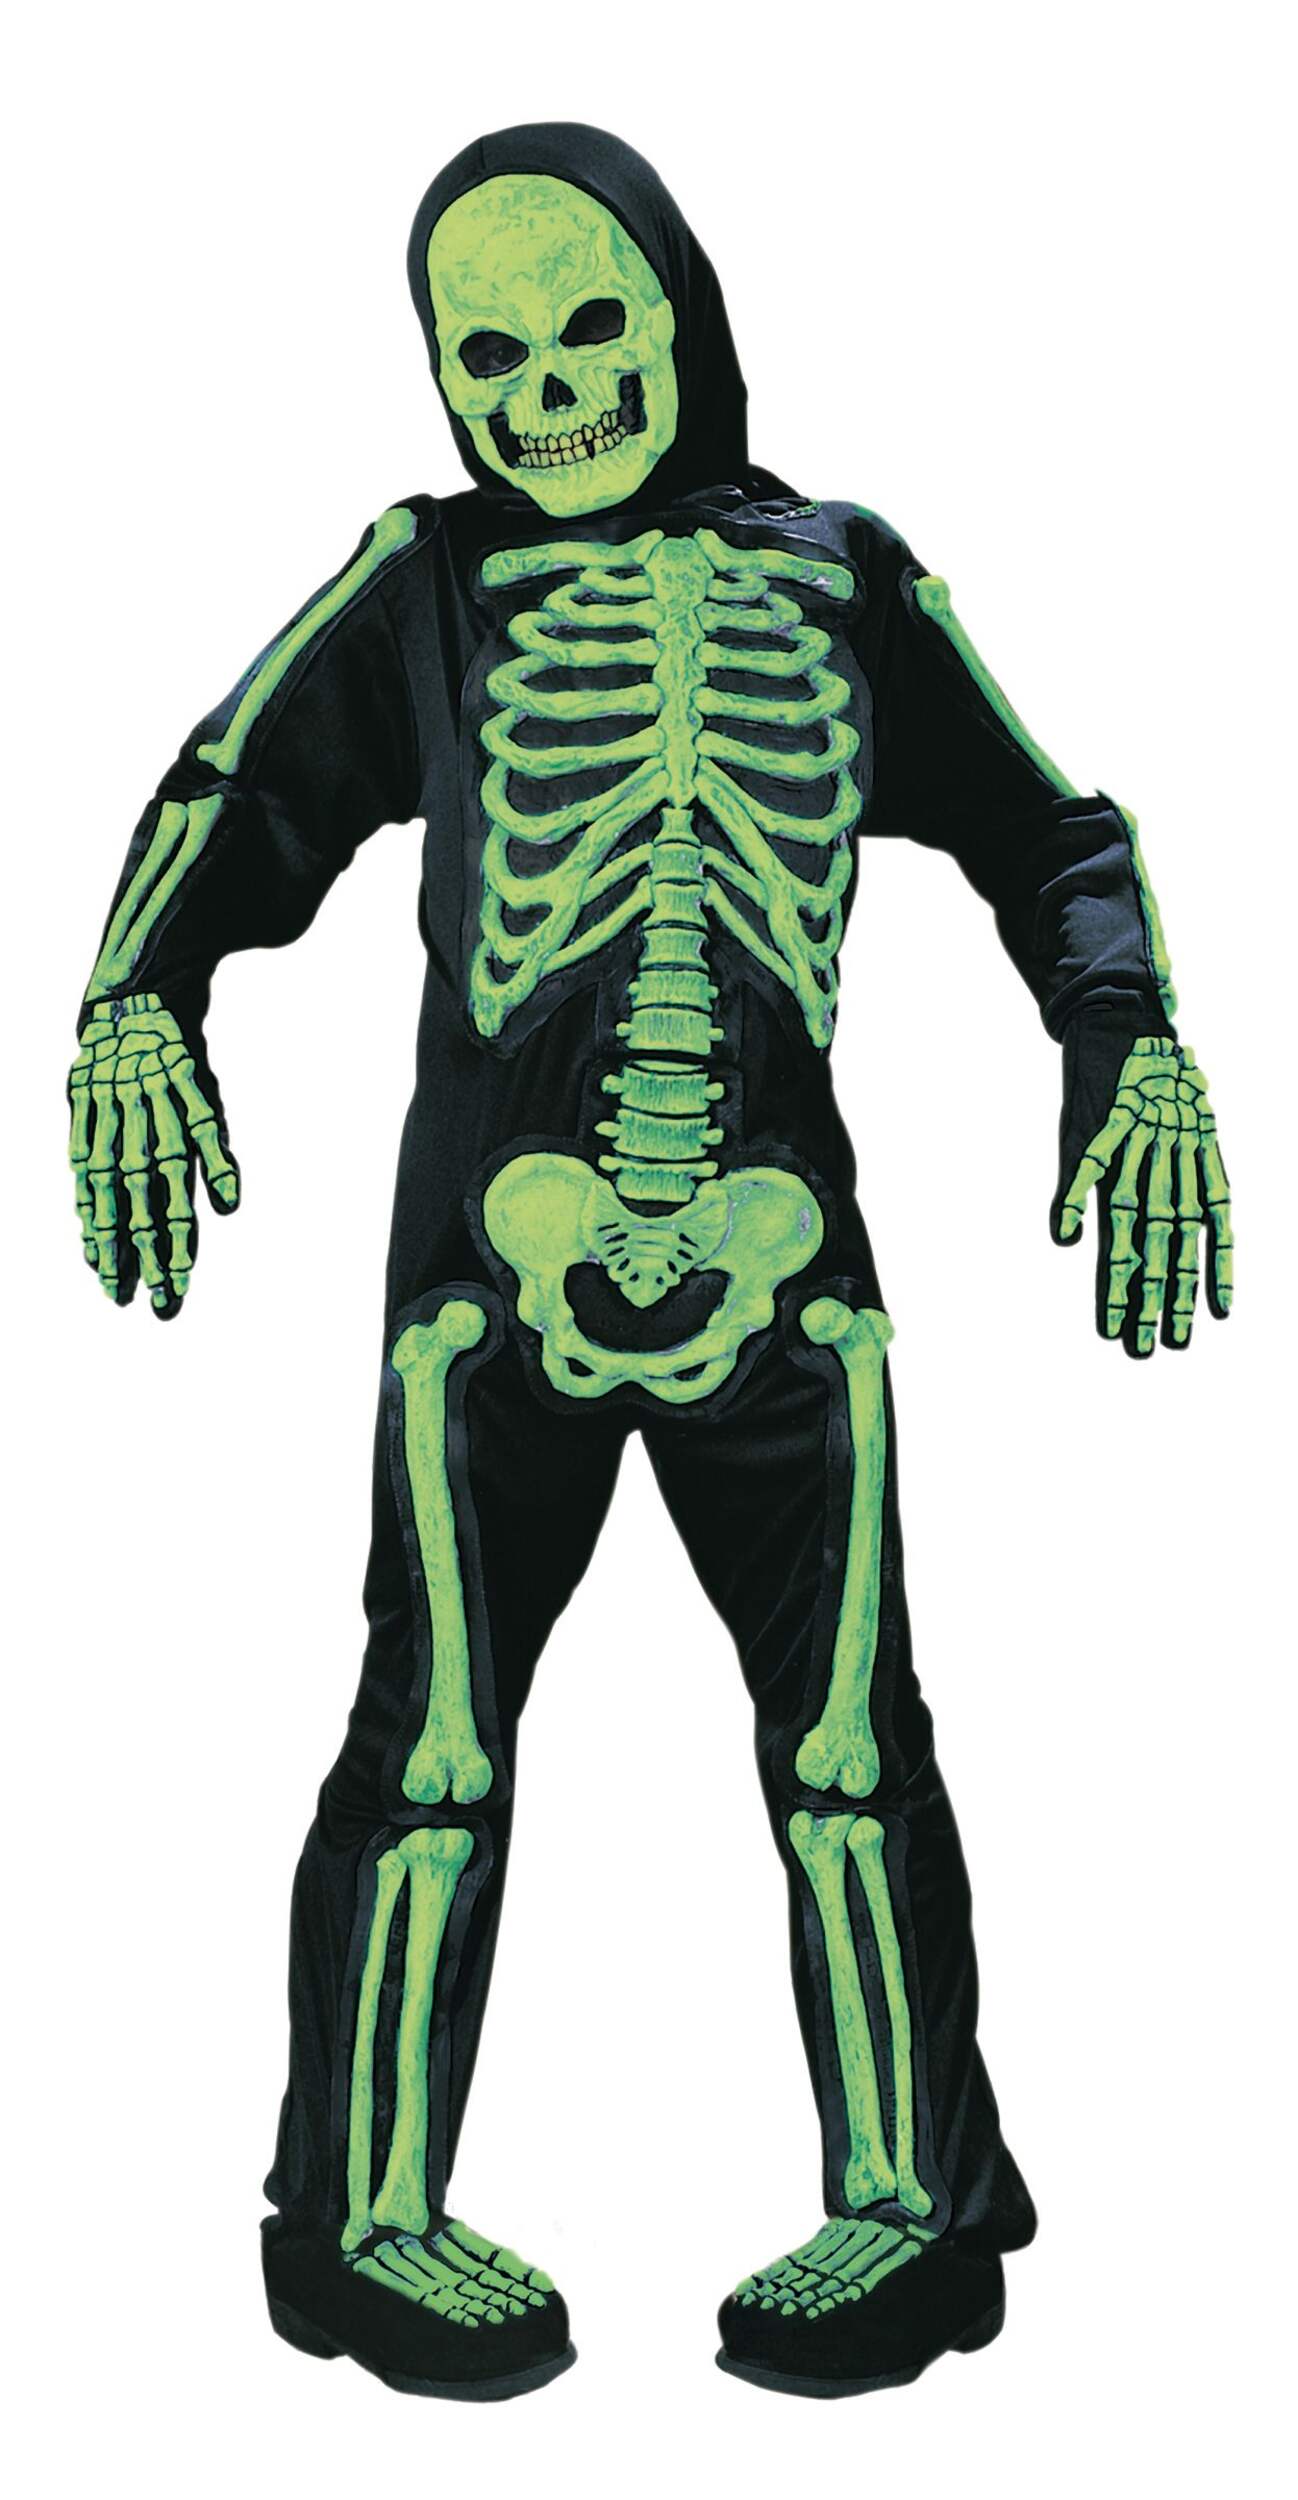 3D X-Ray Neon Skeleton Jumpsuit Halloween Costume, Kids, Small | Party City